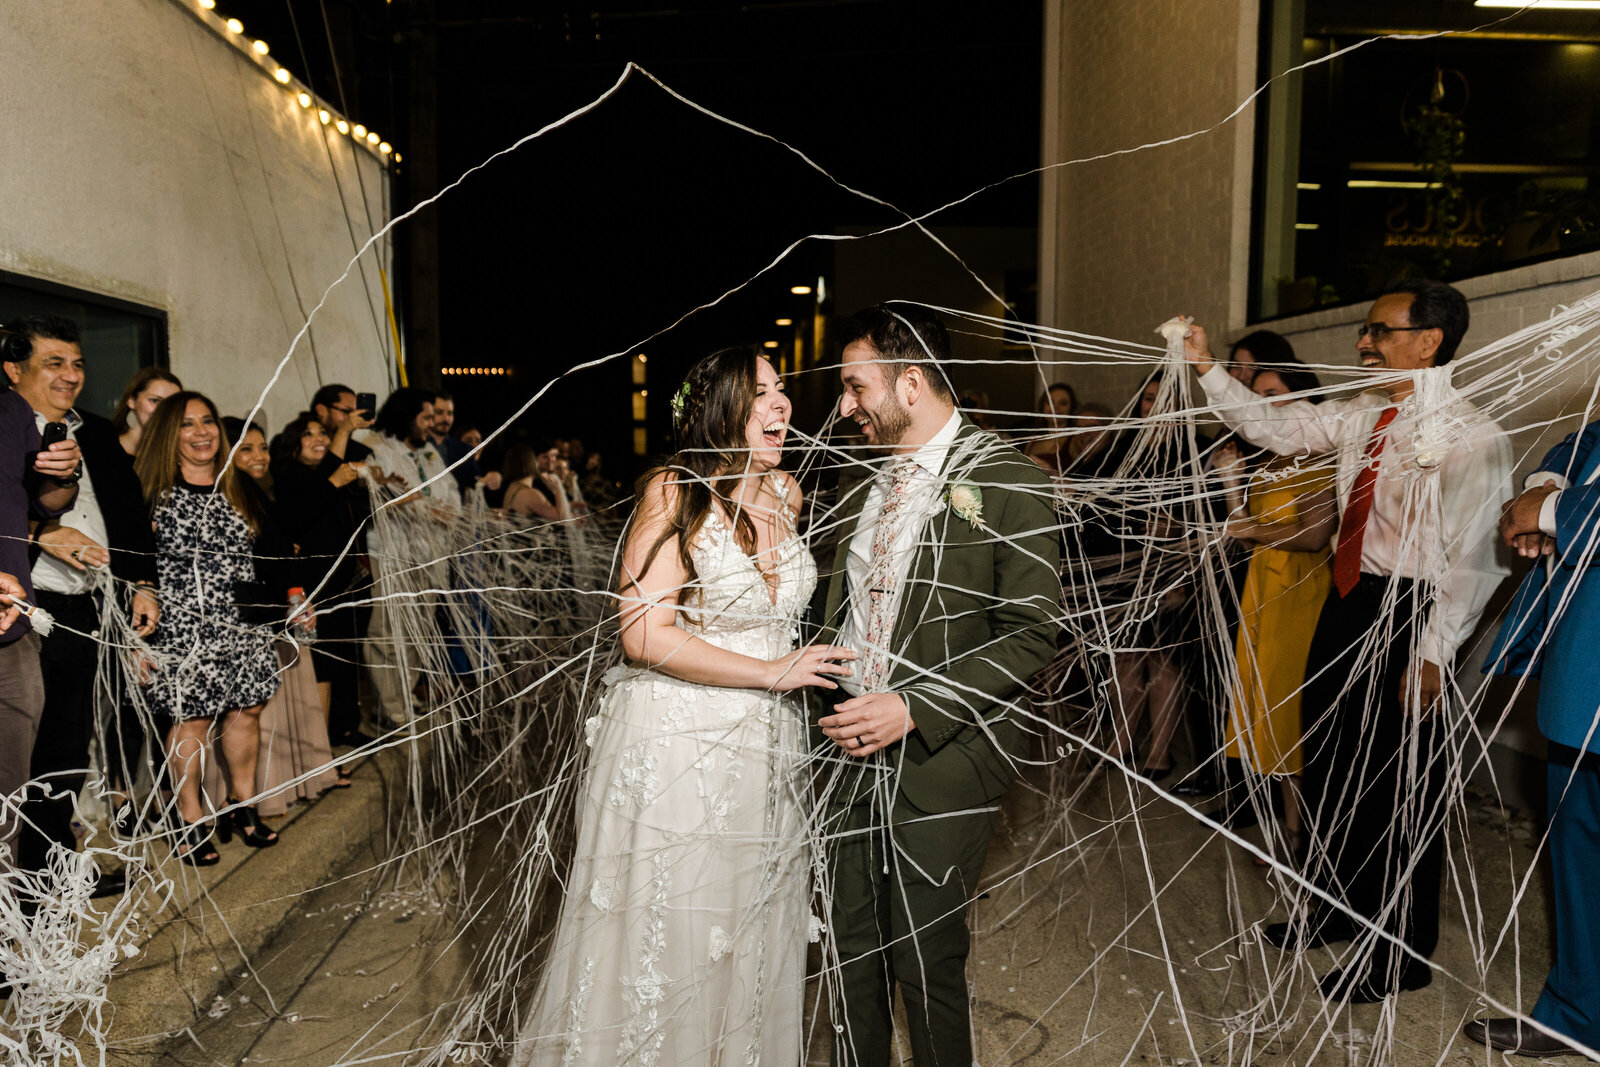 This is a wedding exit photo! A bride and groom are being showered with silver streamers by their guests, and it's at night. They're both laughing as the strings fly through the air.